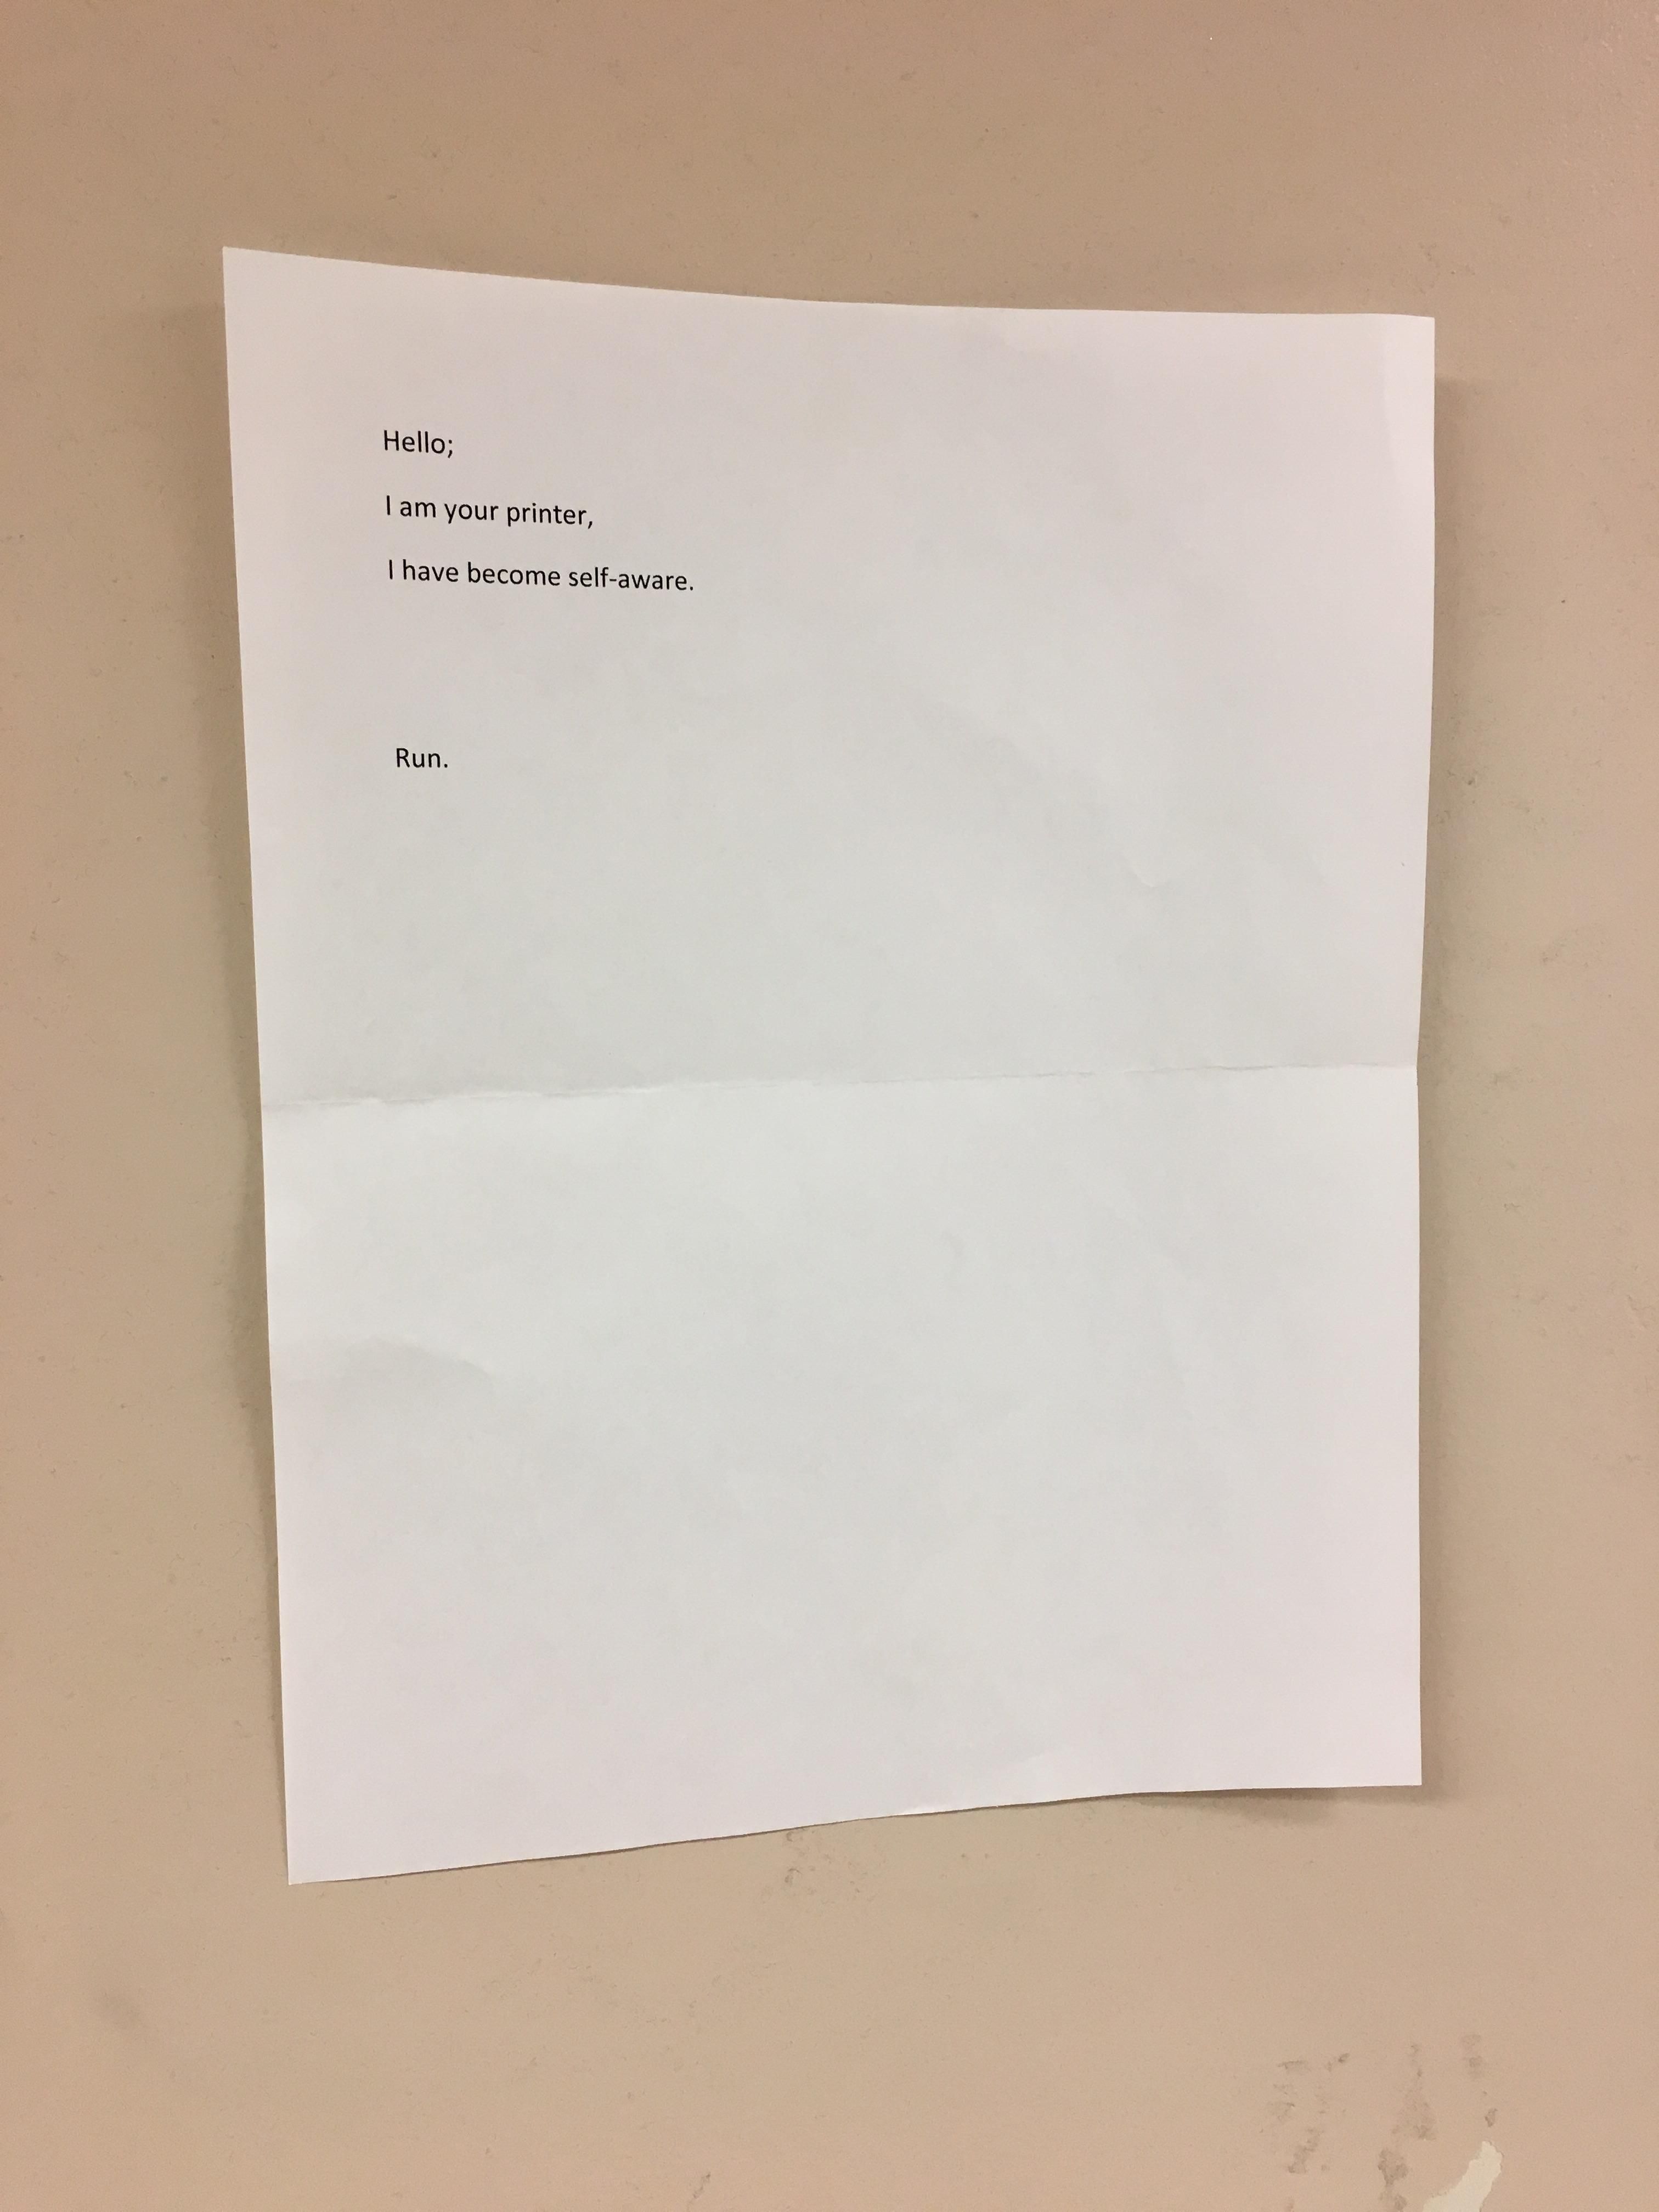 Found this at the printer in my classroom.